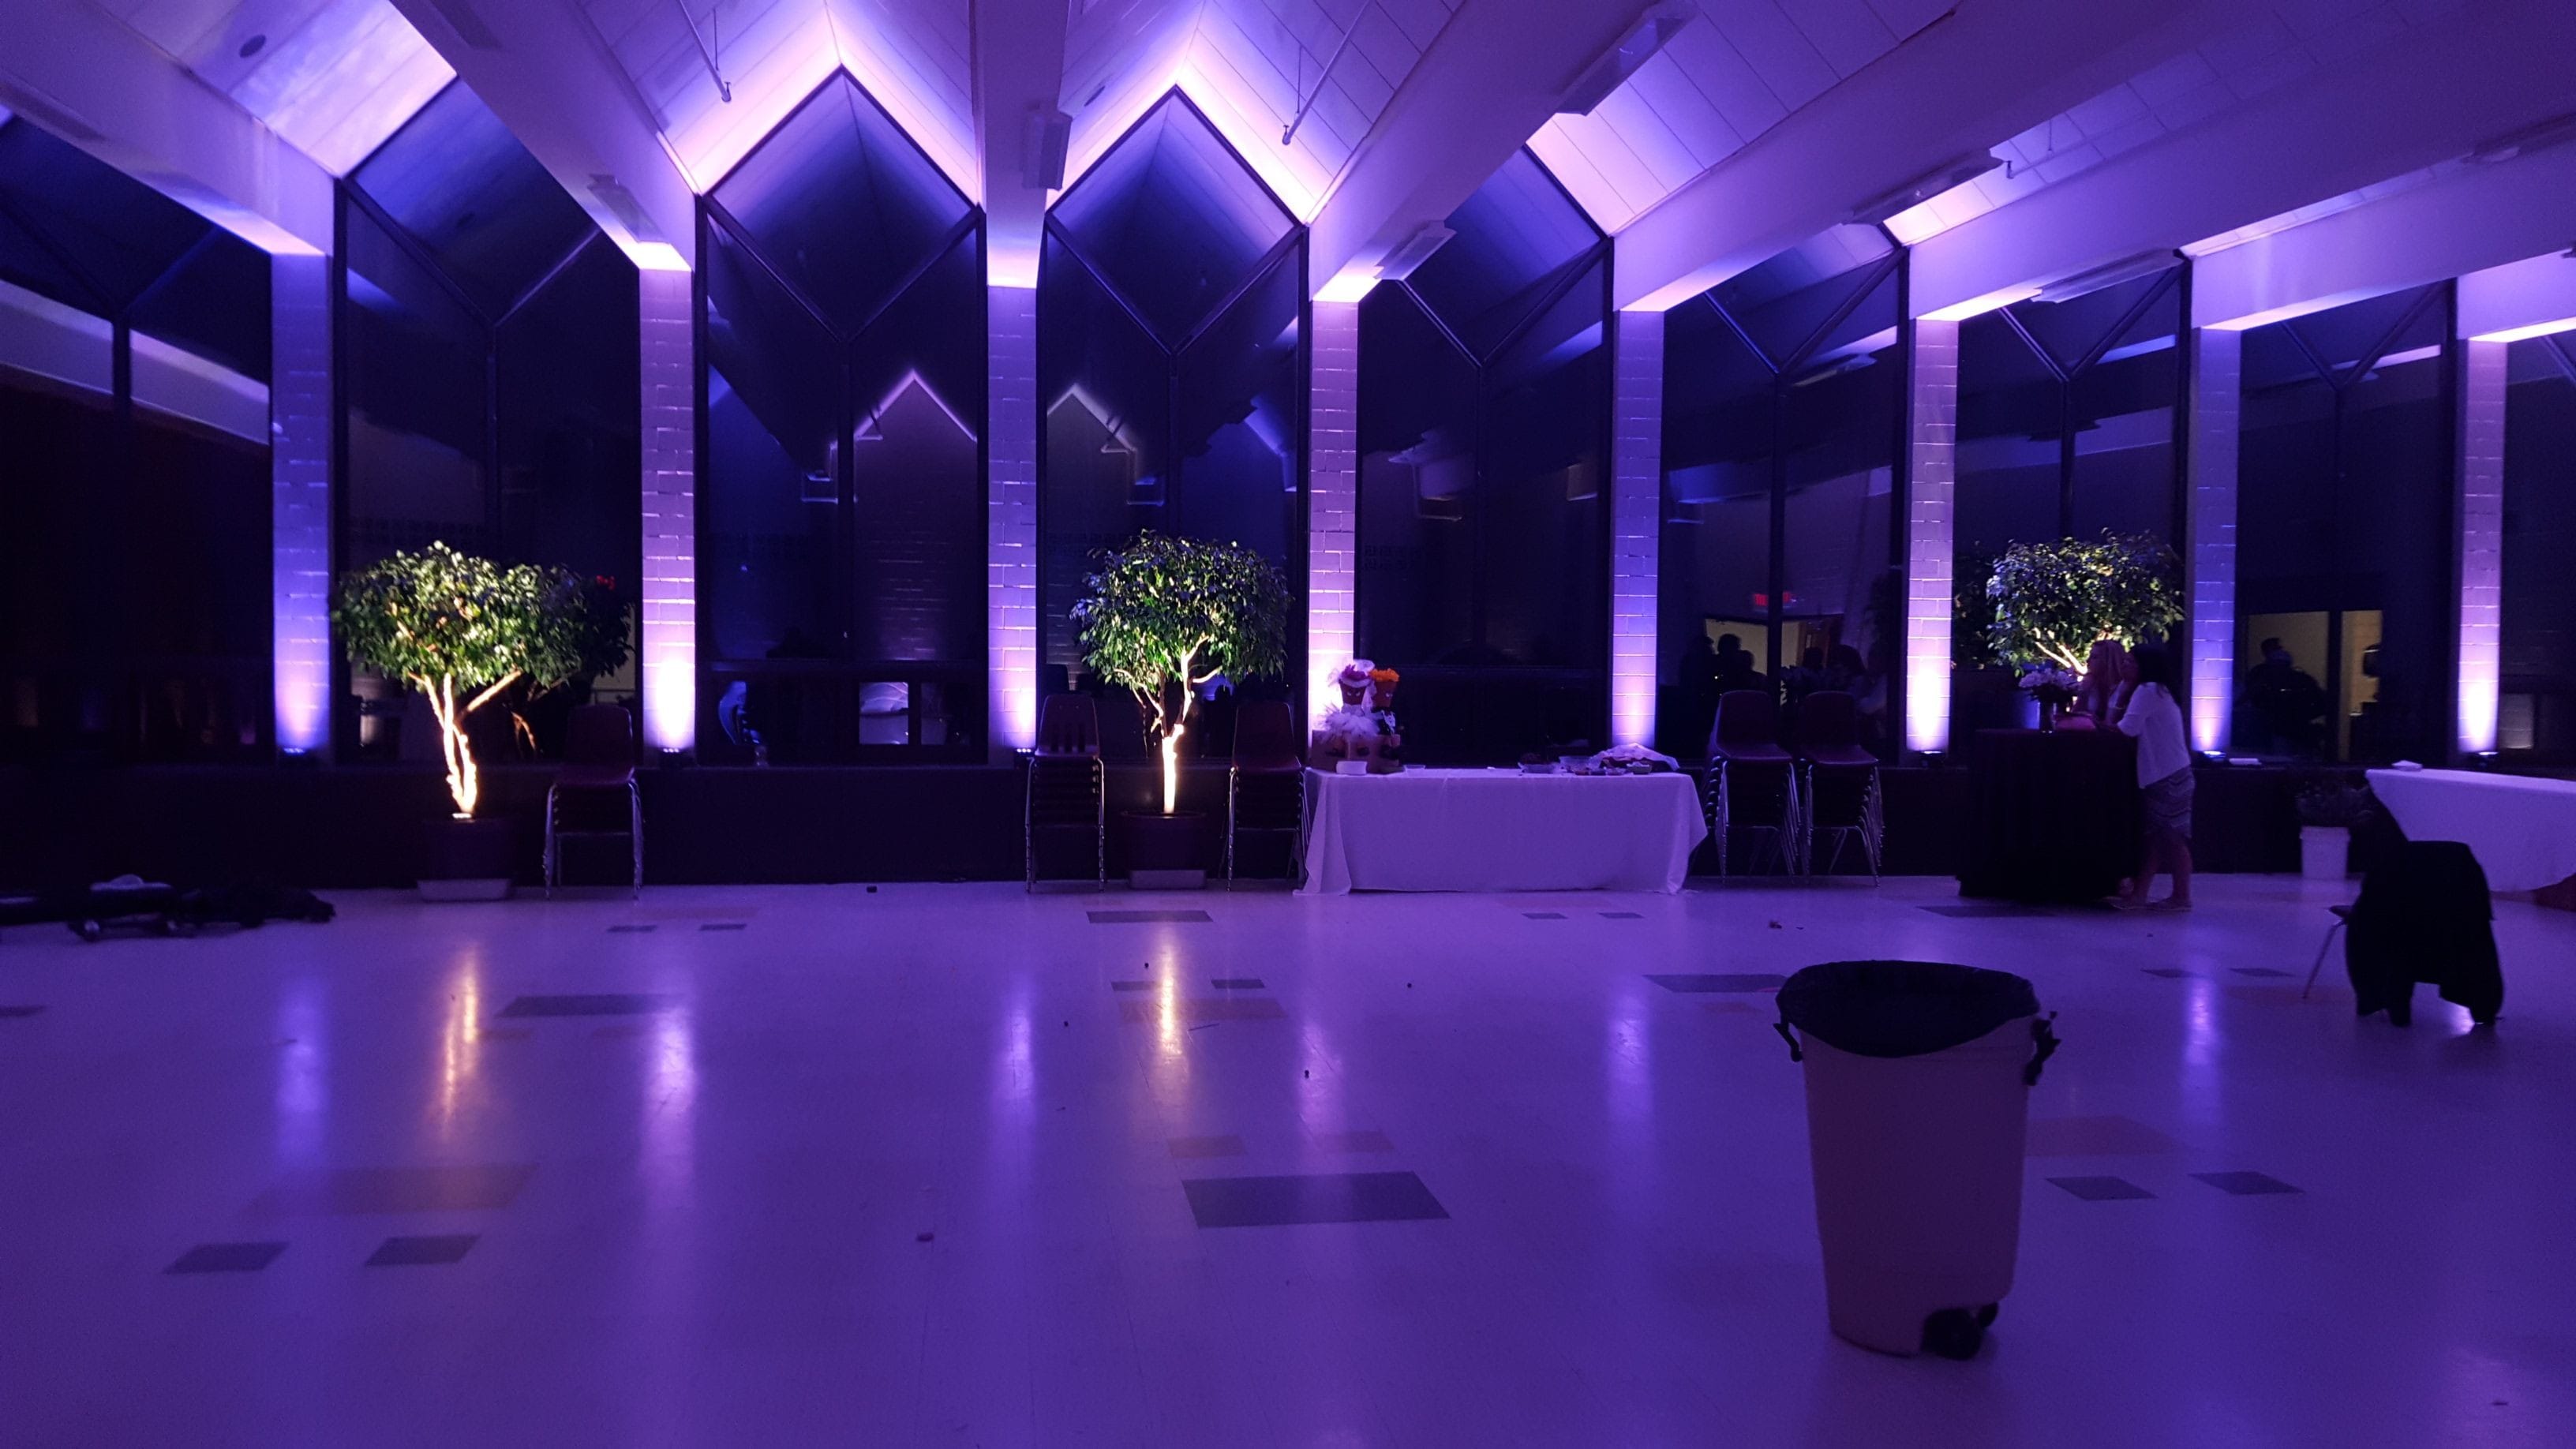 Marshall School cafeteria. Wedding lighting in two tone lavender.